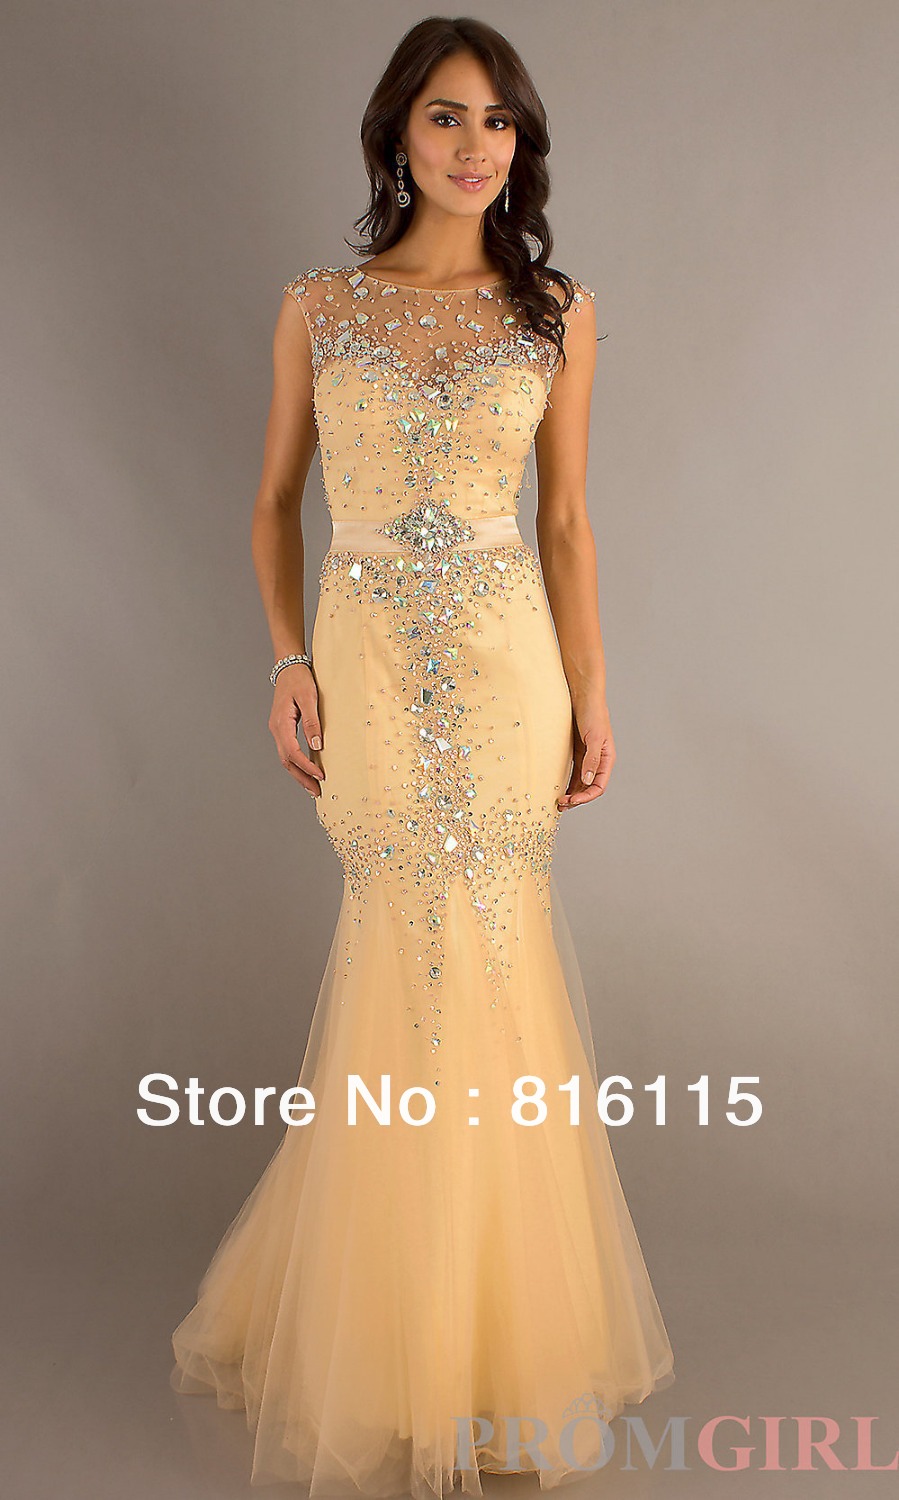 Most Beautiful New Tulle Sleeveless Mermaid Gown by Dave and Johnny ...